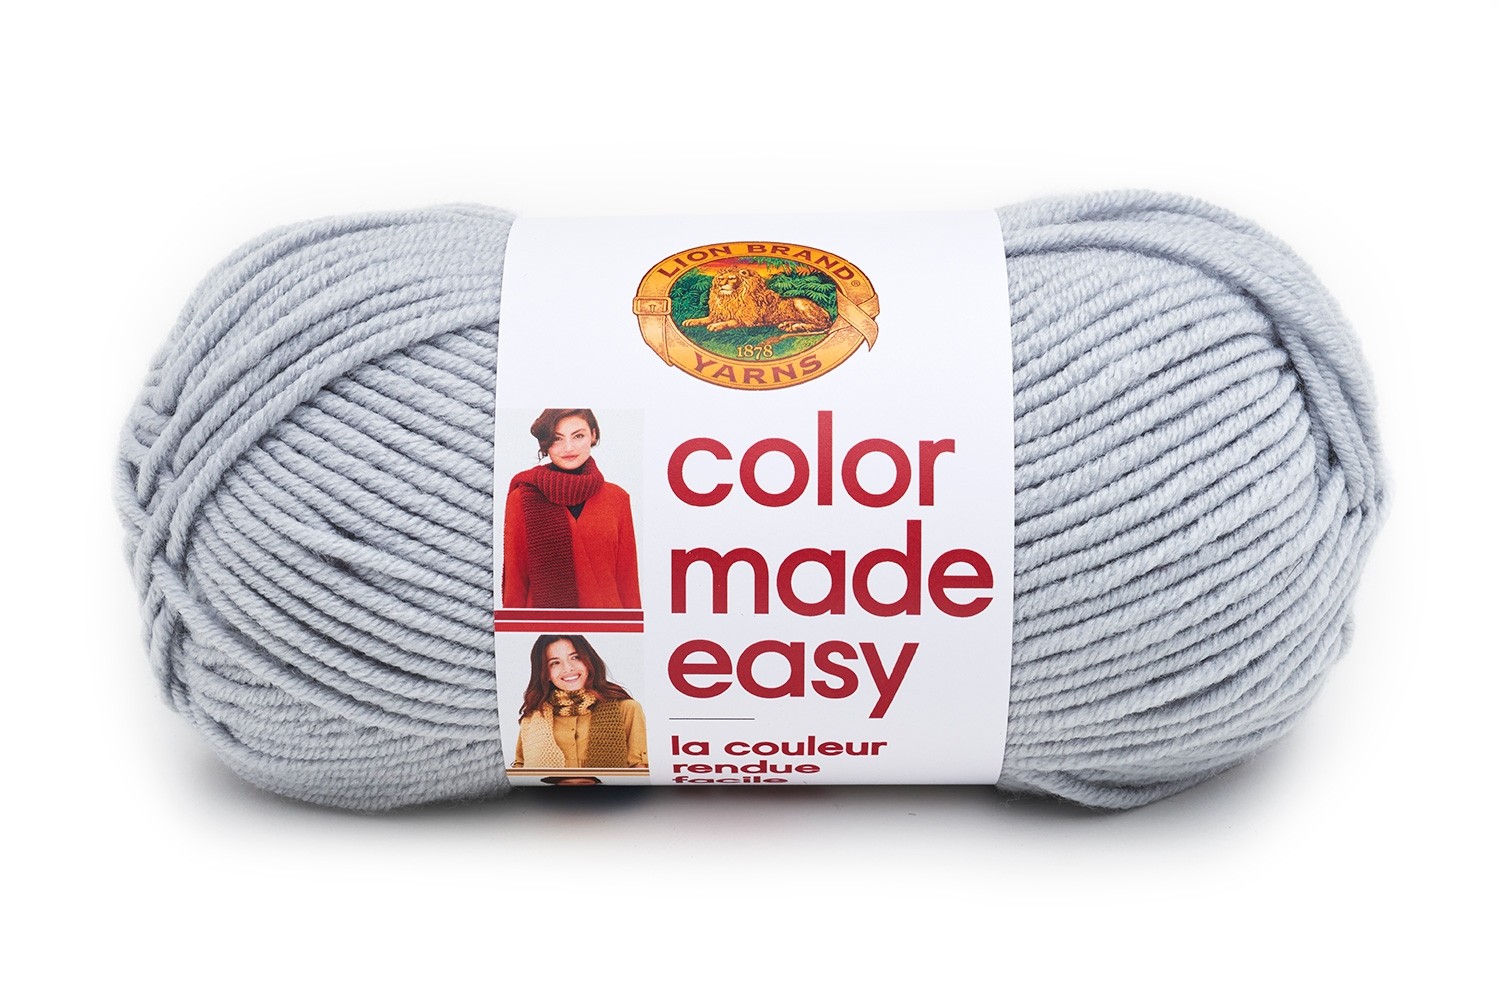 Lion Brand Yarn - Here's what Sutton Foster has to say